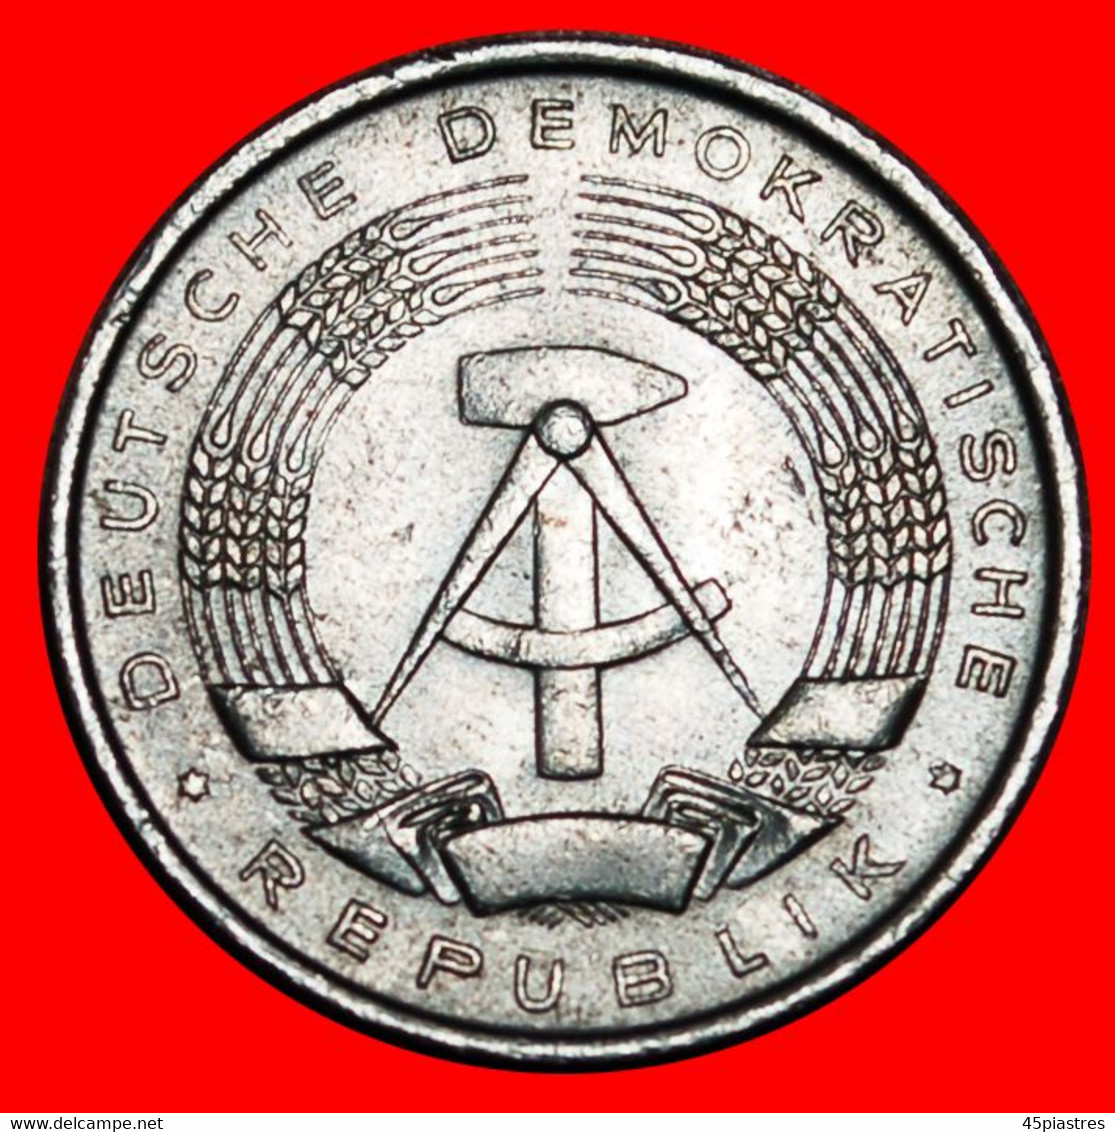 * HAMMER AND COMPASS (1960-1990): GERMANY ★ 1 PFENNIG 1963A! DISCOVERY COIN! LOW START ★ NO RESERVE! - 1 Pfennig